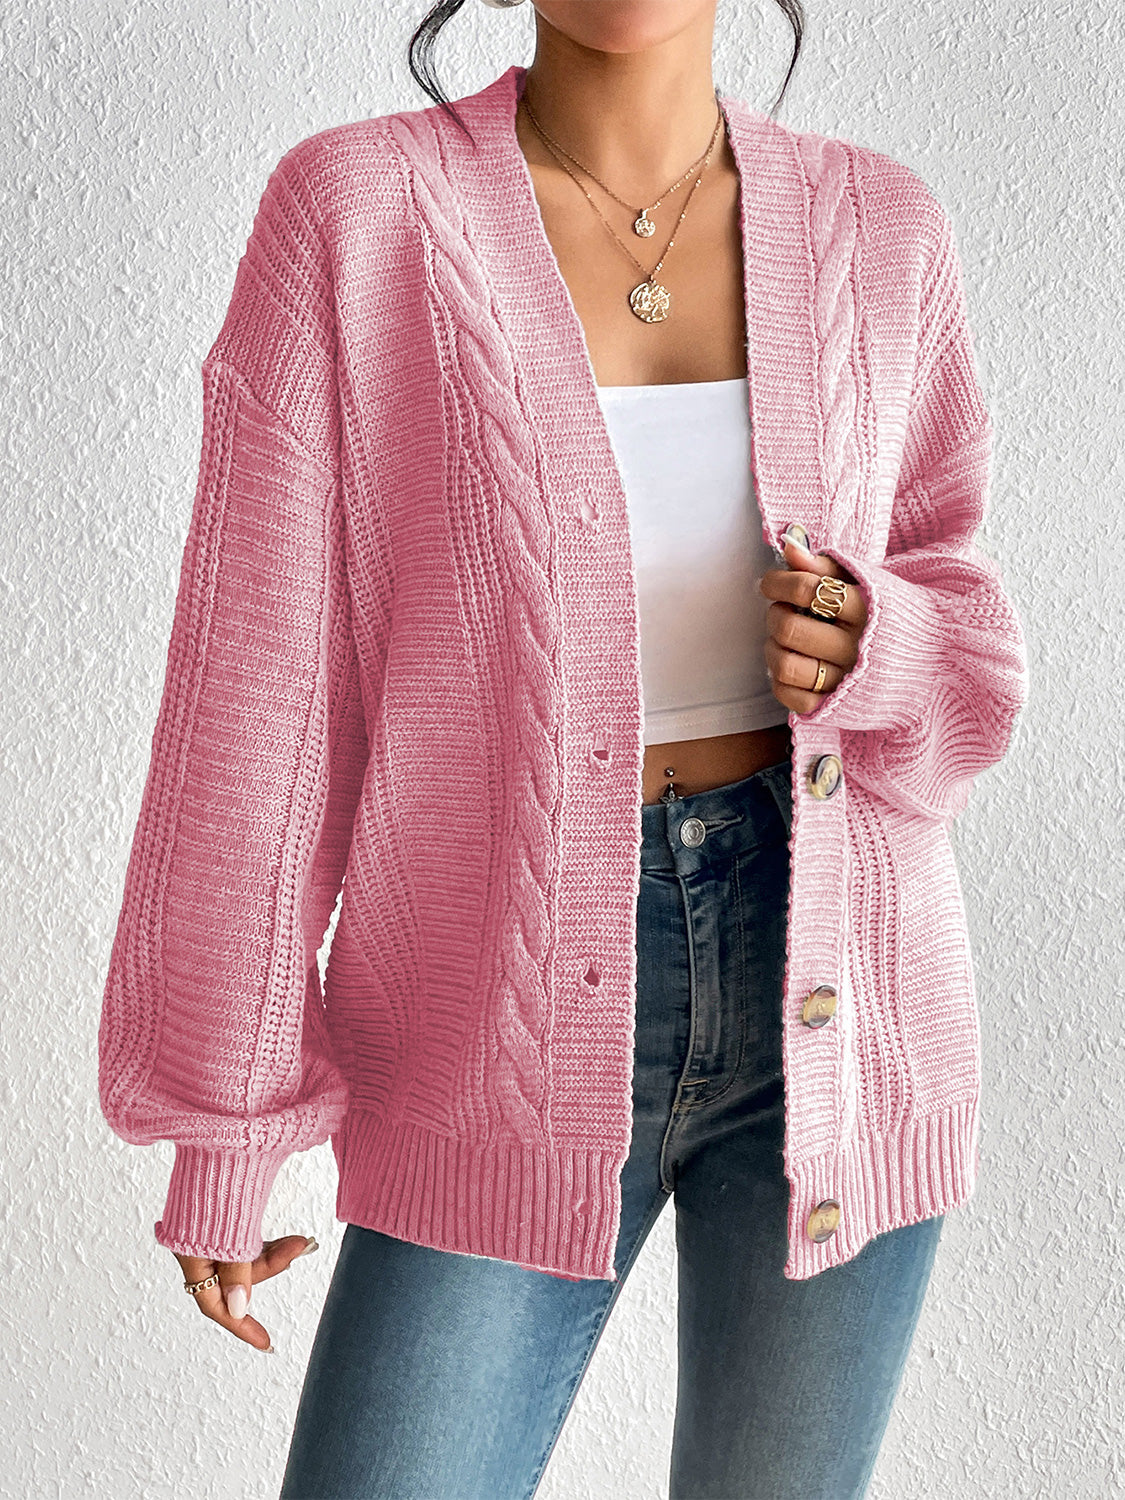 Cable-Knit Button Down Cardigan - Pink / S - Women’s Clothing & Accessories - Shirts & Tops - 13 - 2024